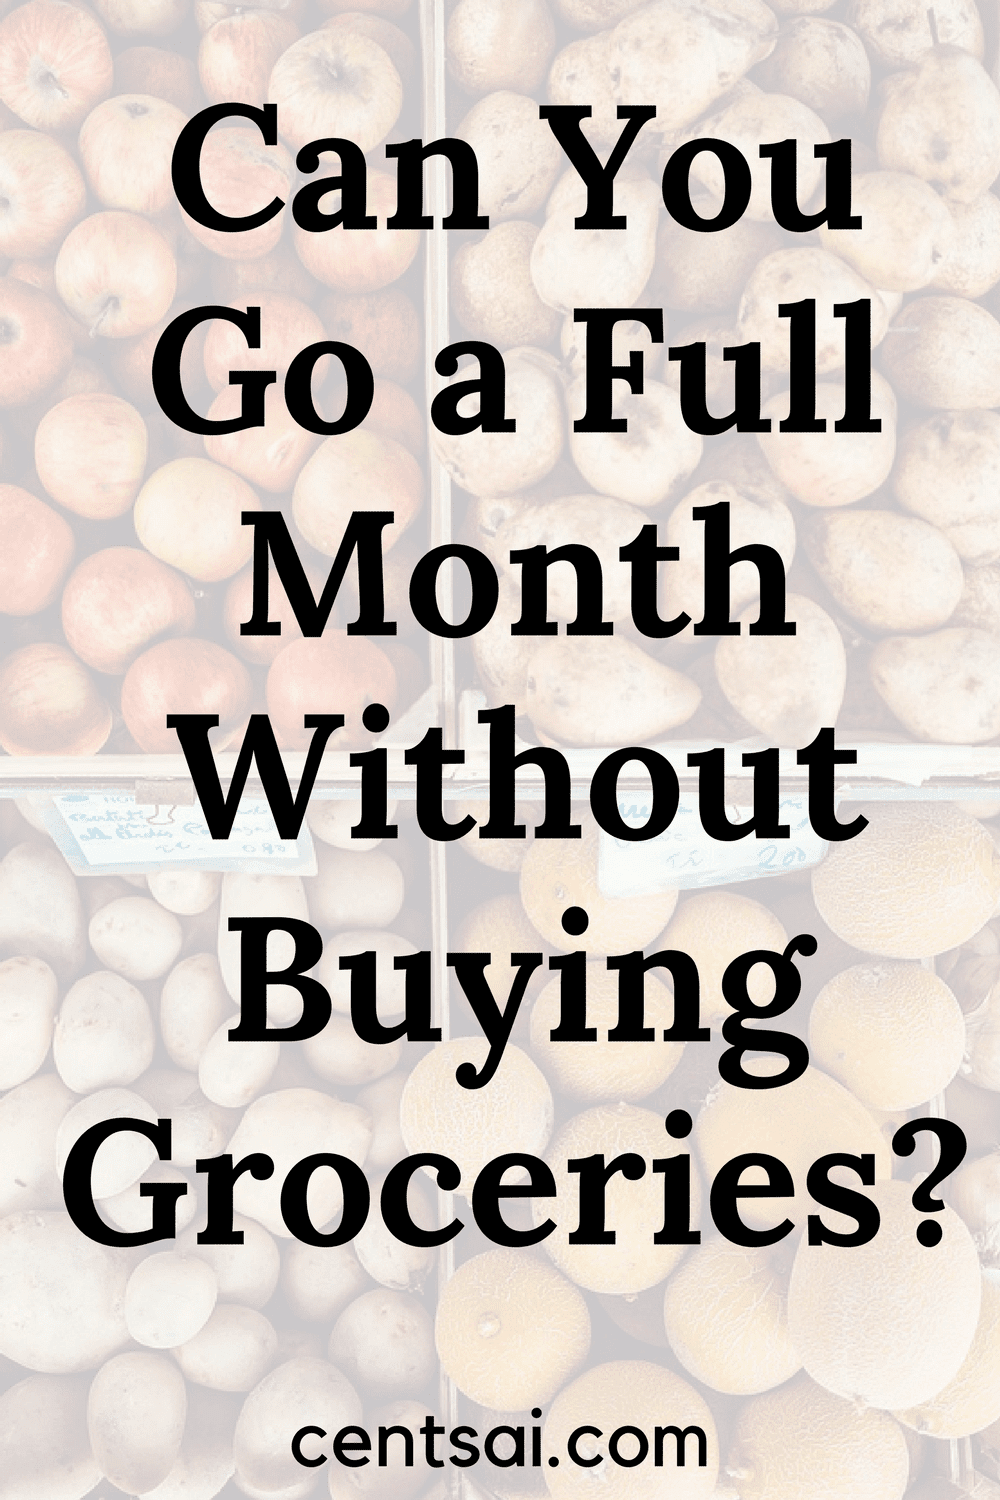 Can You Go a Full Month Without Buying Groceries? Take the challeenge and see how much you can save!